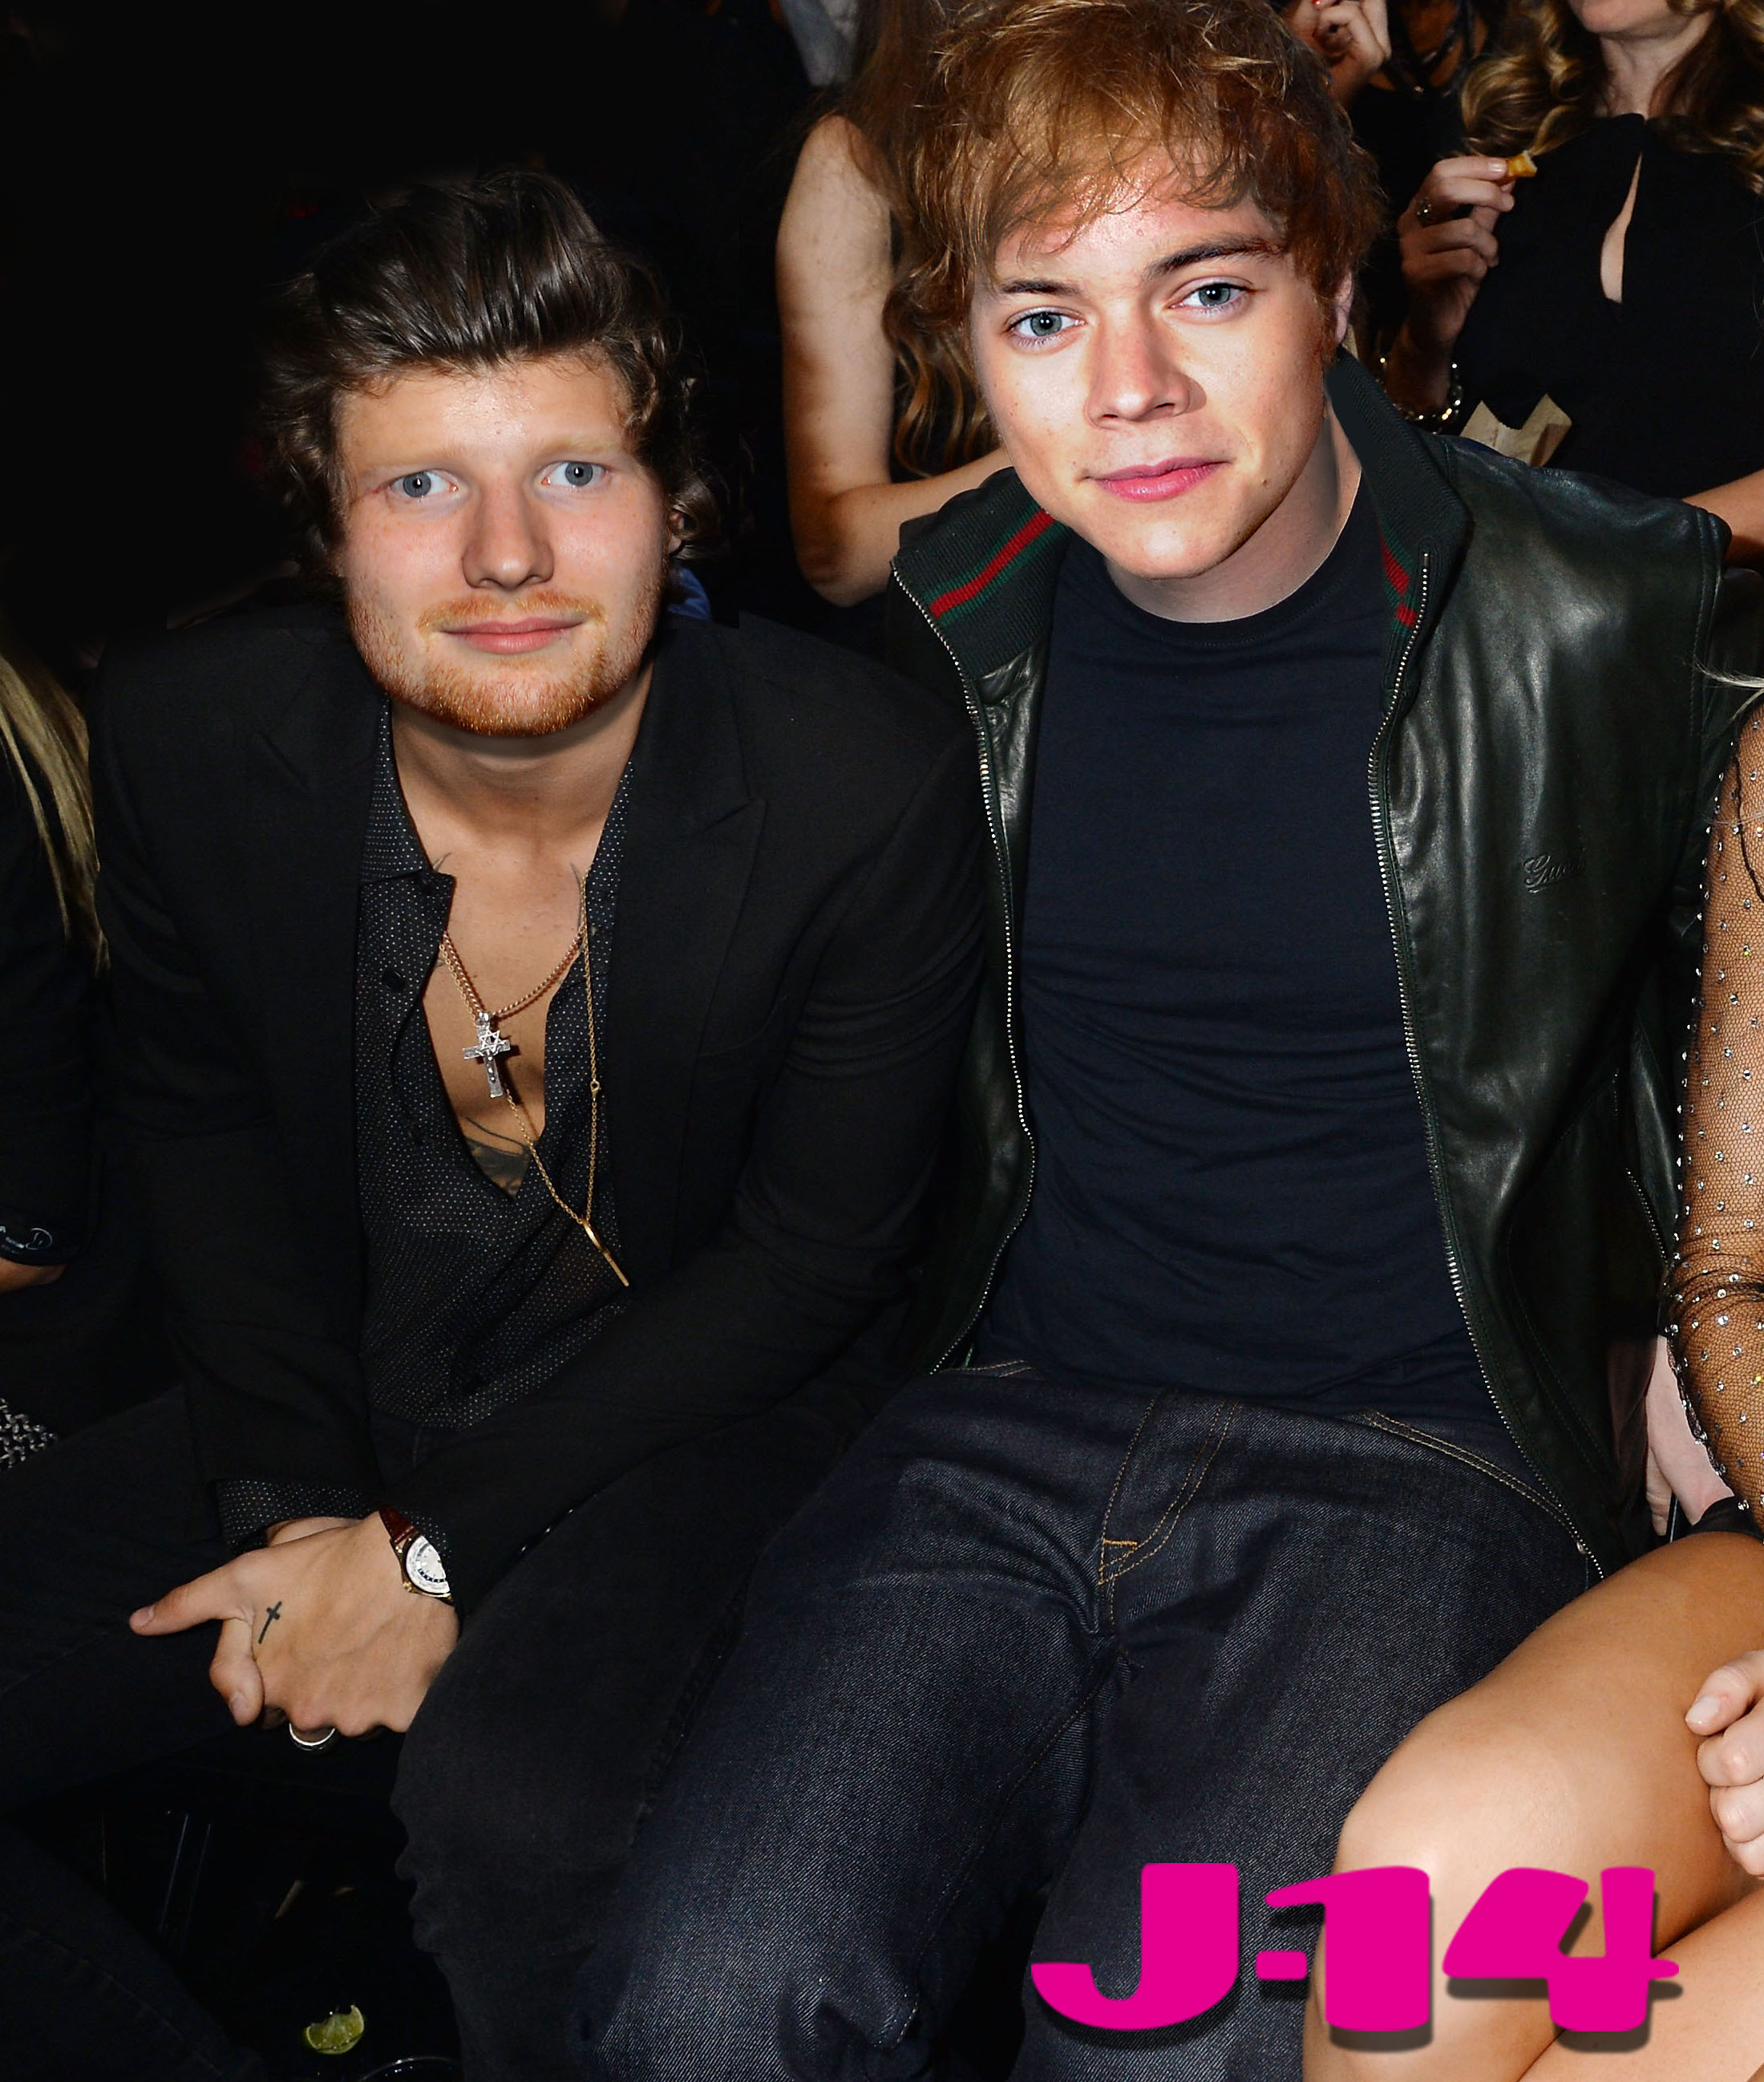 harry styles and taylor swift face swap